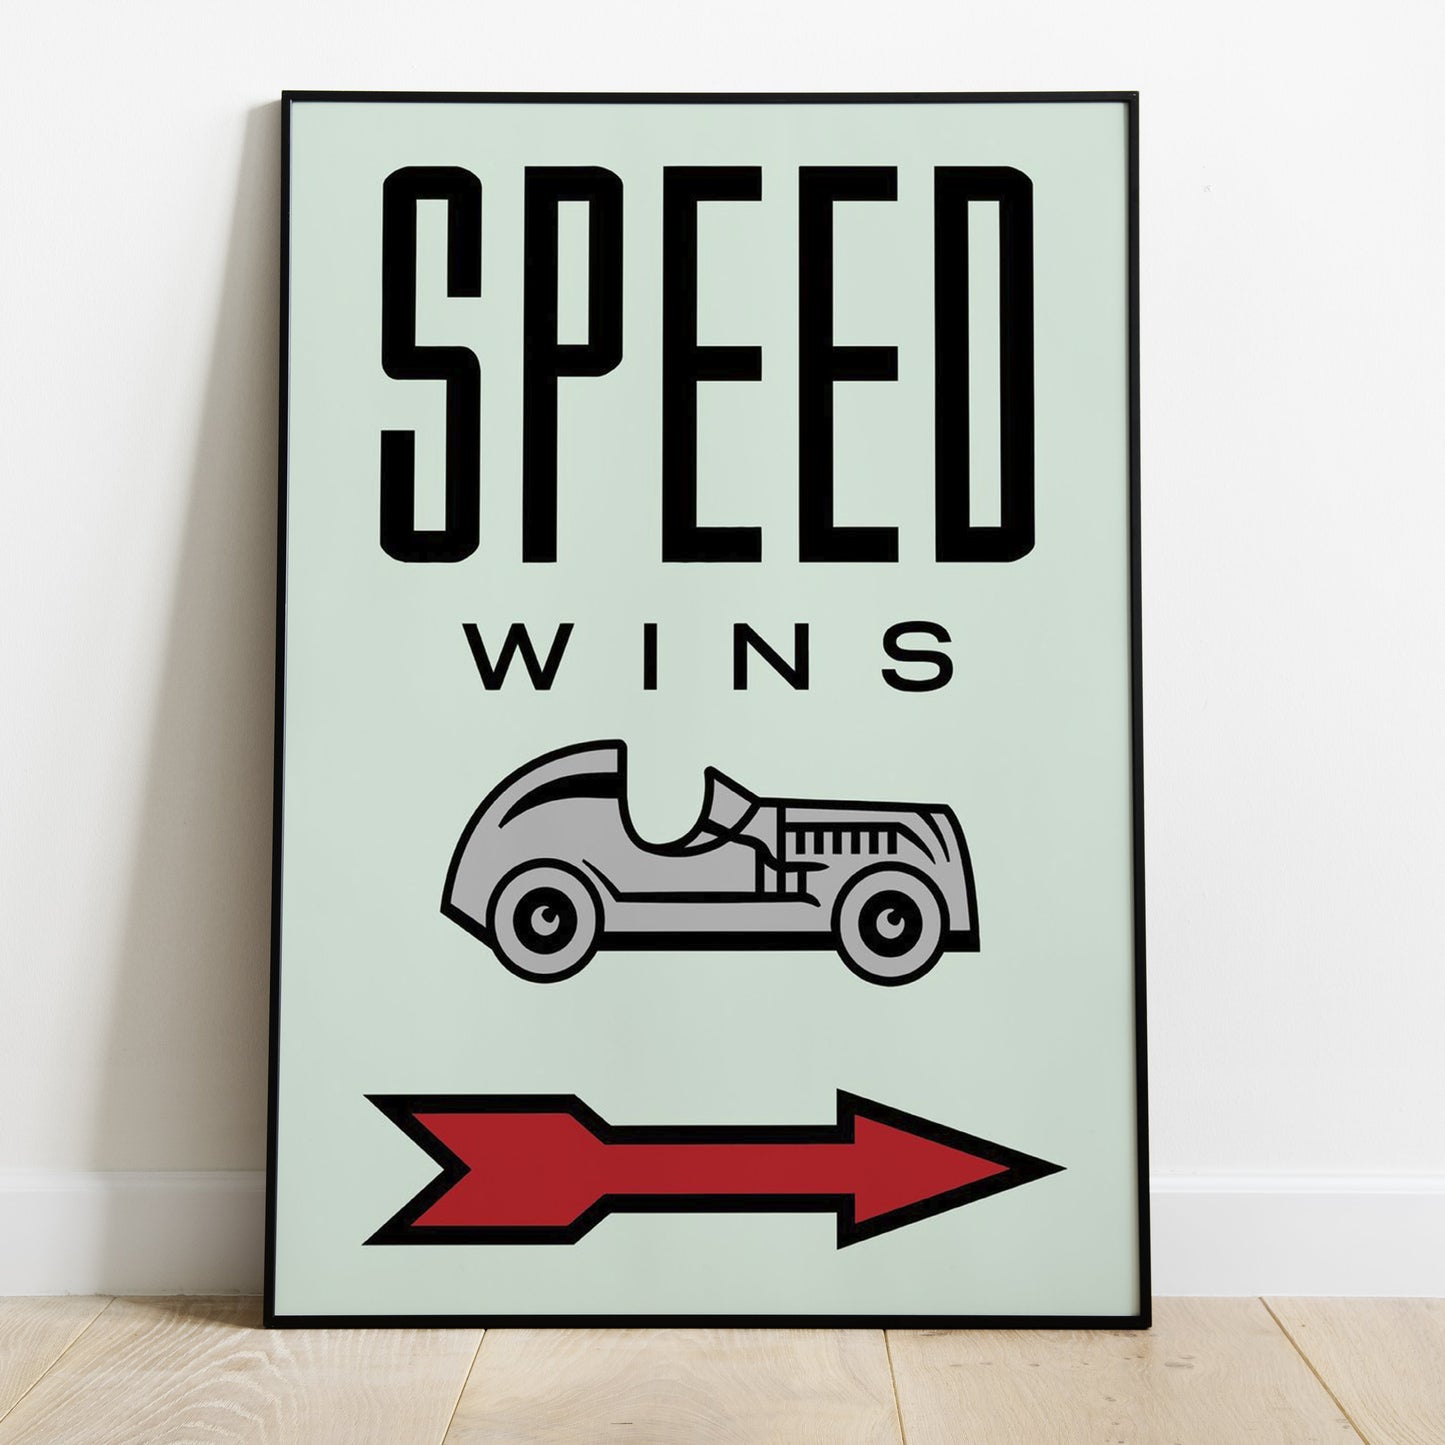 SPEED WINS Motivating Wall Art Poster for Home Office